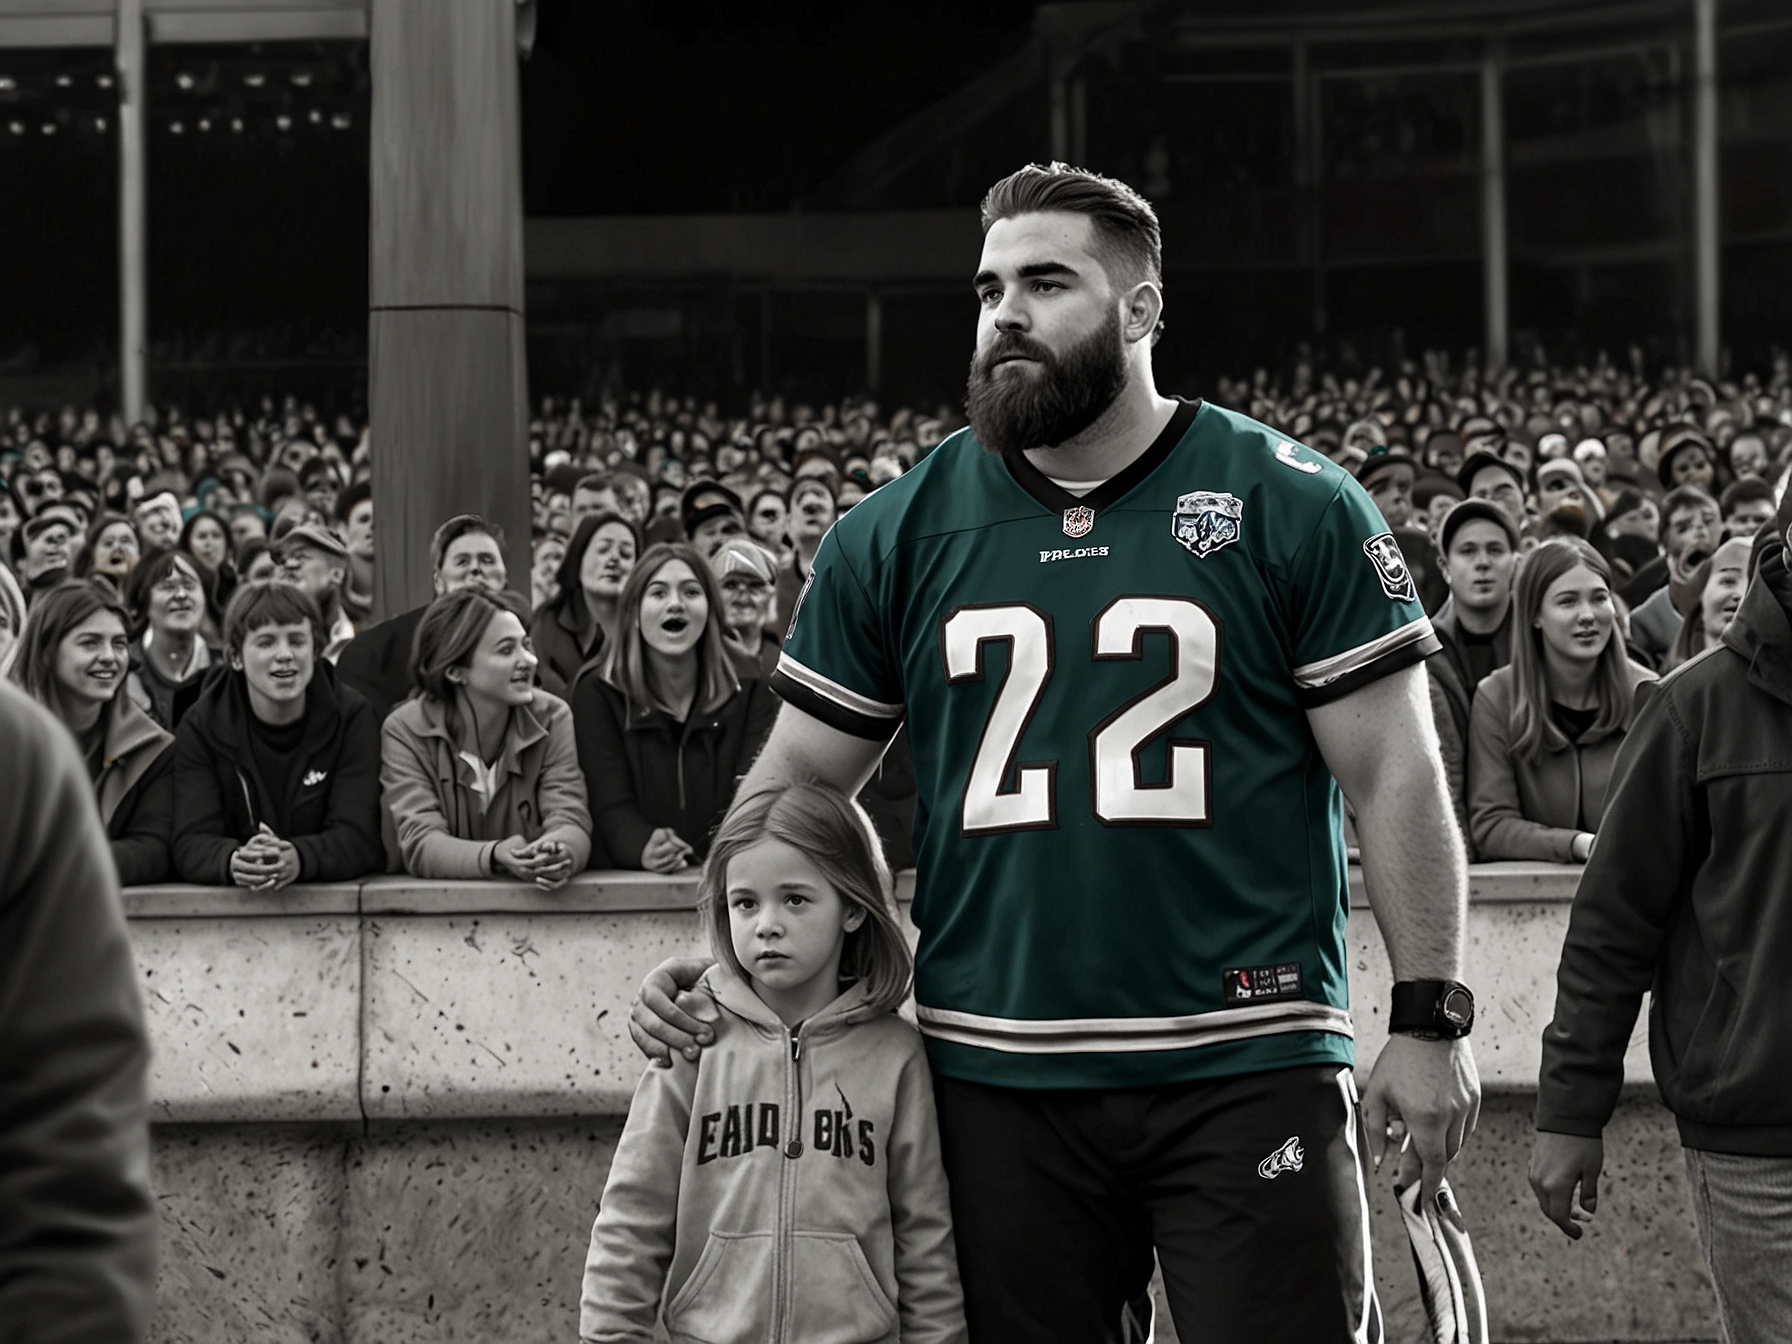 Jason Kelce, dressed casually, sneaks up behind a young boy in an Eagles jersey standing among the crowd outside London's O2 Arena, ready to surprise him before Taylor Swift's concert.